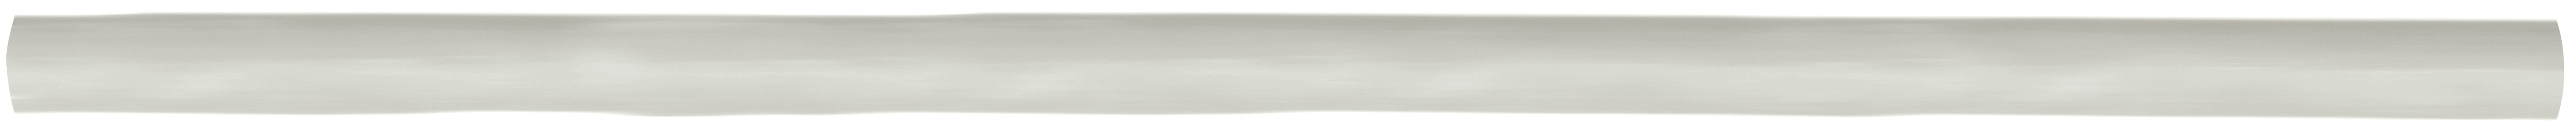 bamboo pattern glazed ceramic quarter round molding from teramoda anatolia collection distributed by surface group international glossy finish pressed edge 12-inch bar shape